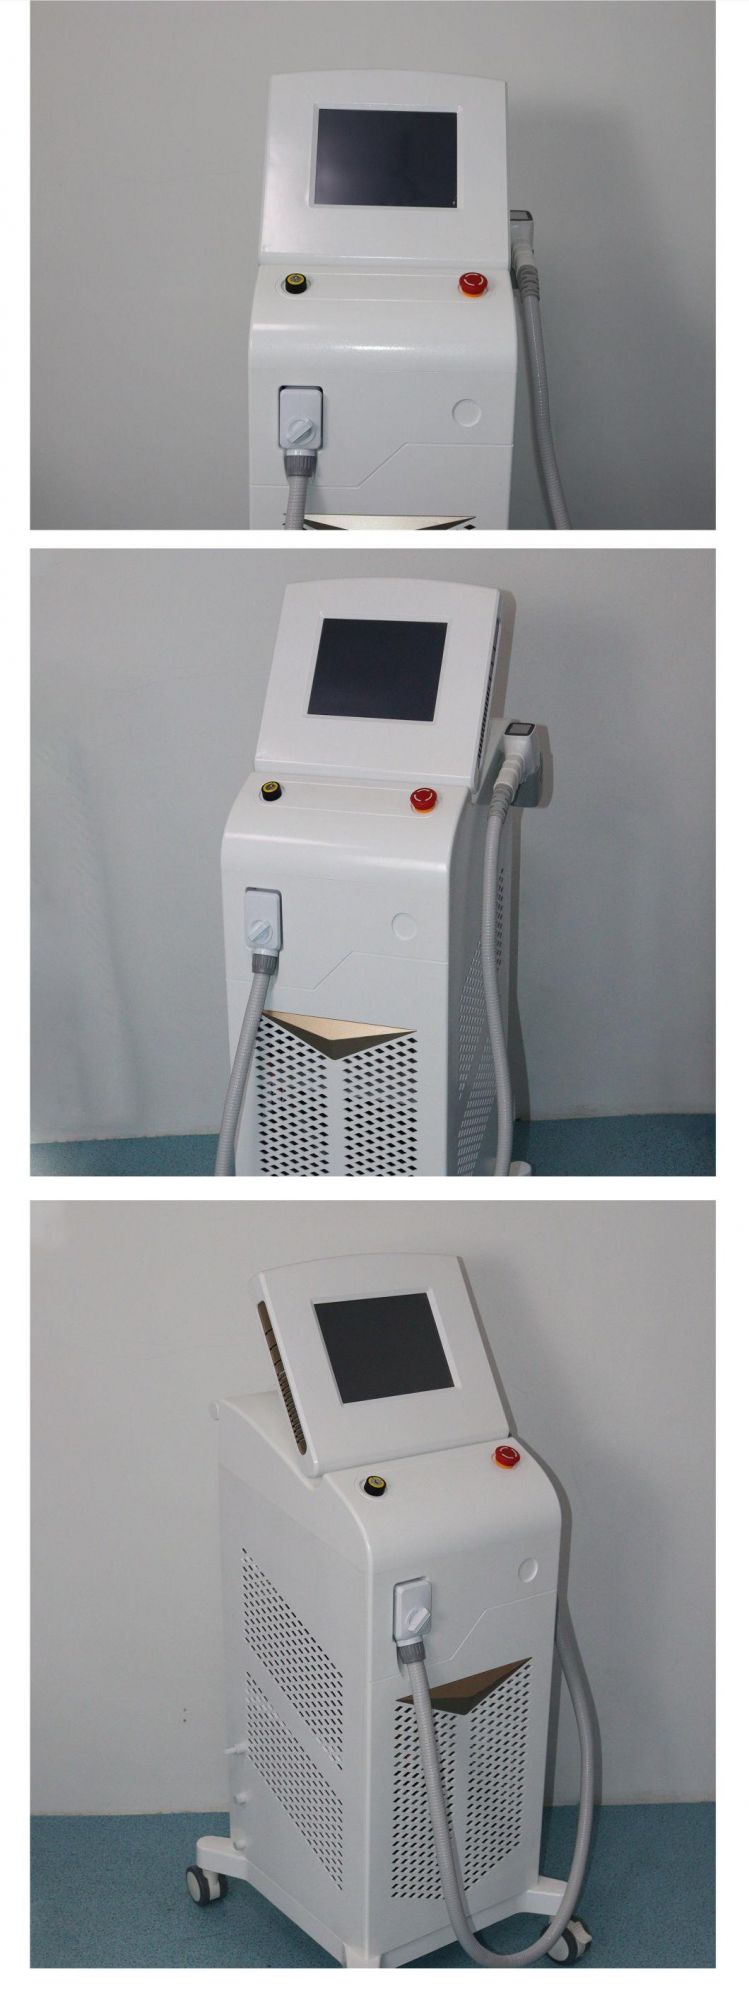 808 Diode Laser Hair Removal Machine 808nm Diode Laser Hair Removal